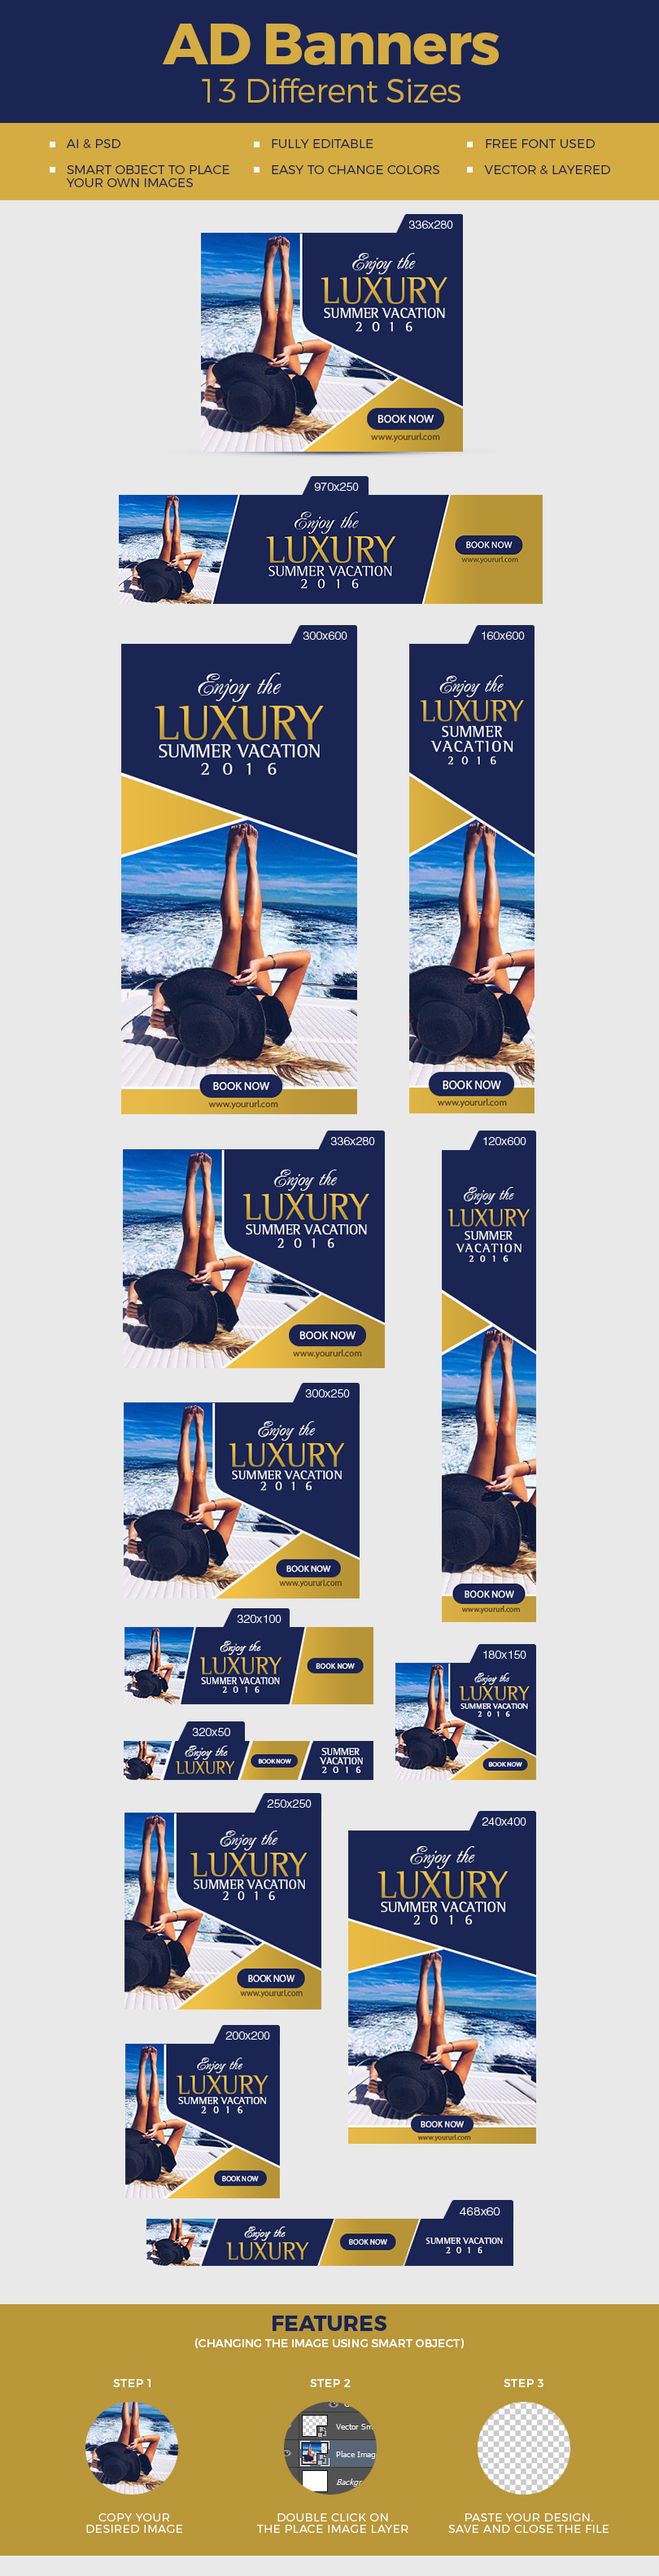 luxury-summer-vacations-ad-banners